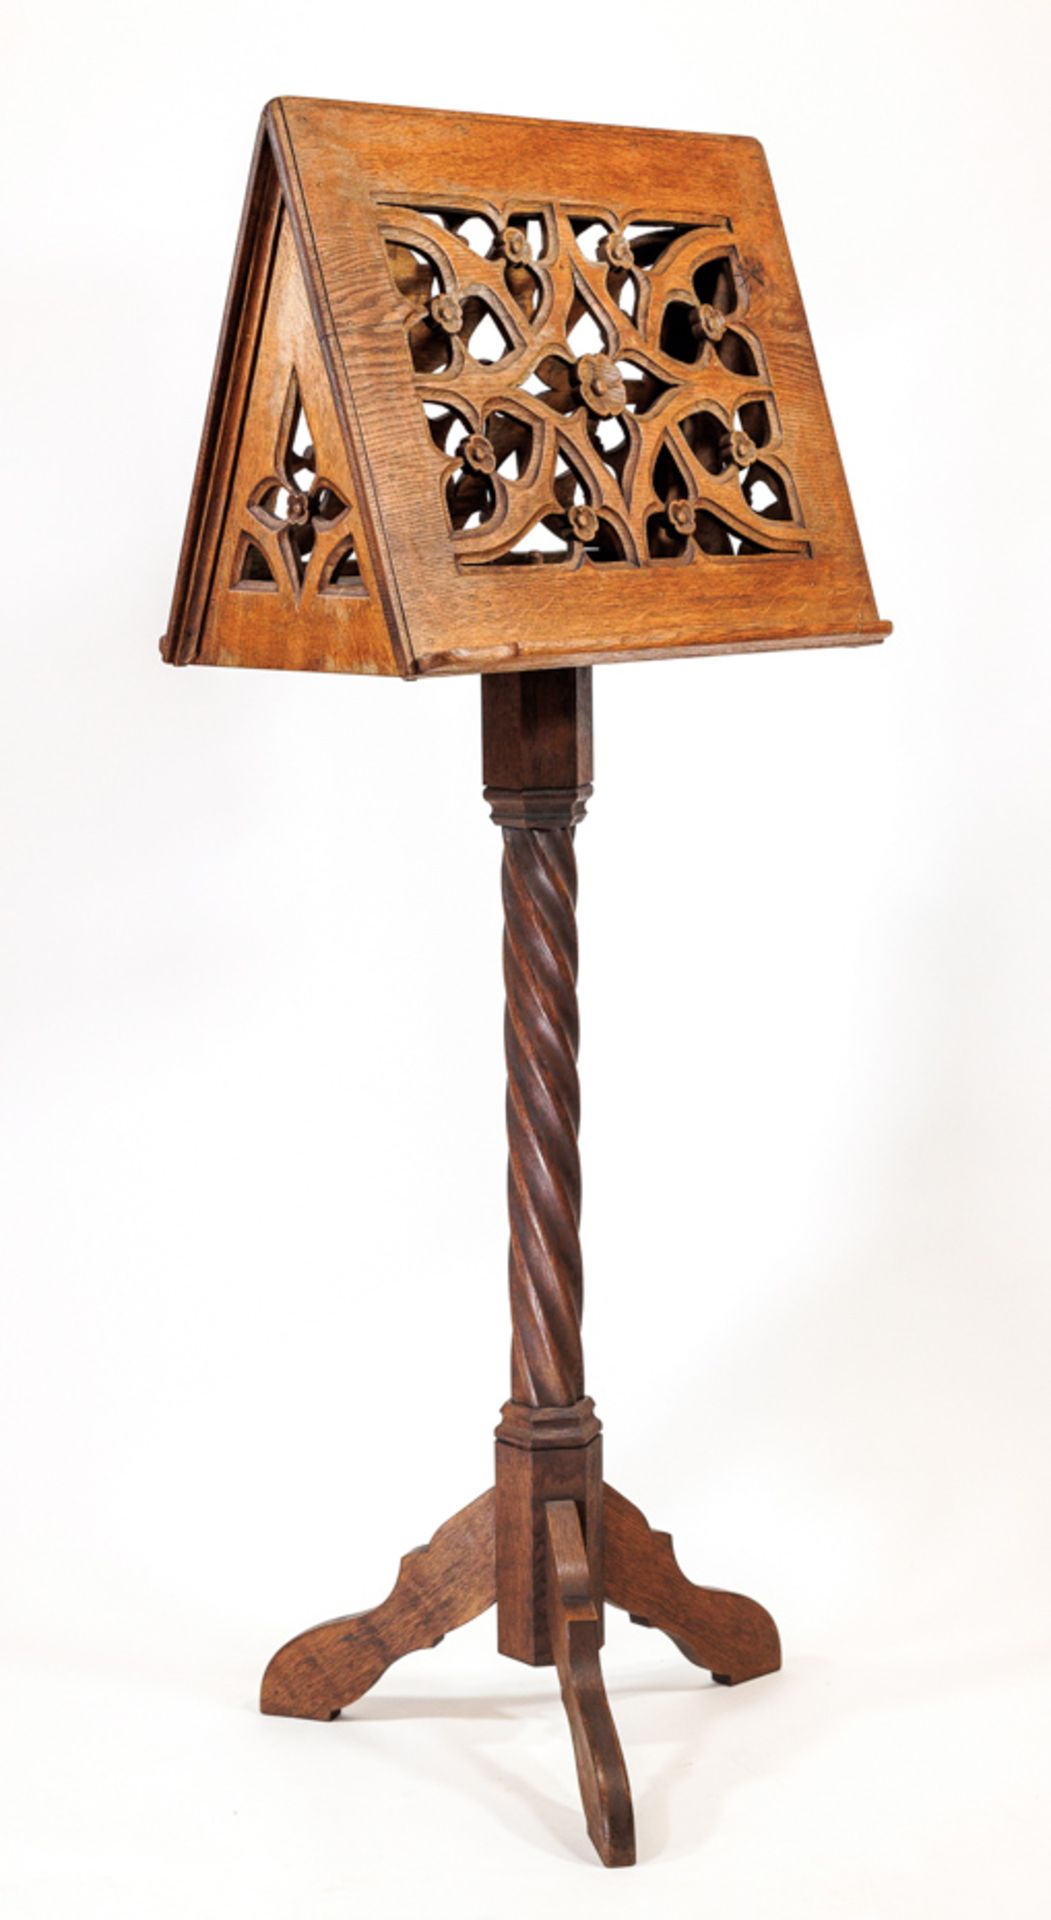 DUETT MUSIC STAND WITH FLORAL CARVING, EIFEL/GERMANY AROUND 1840